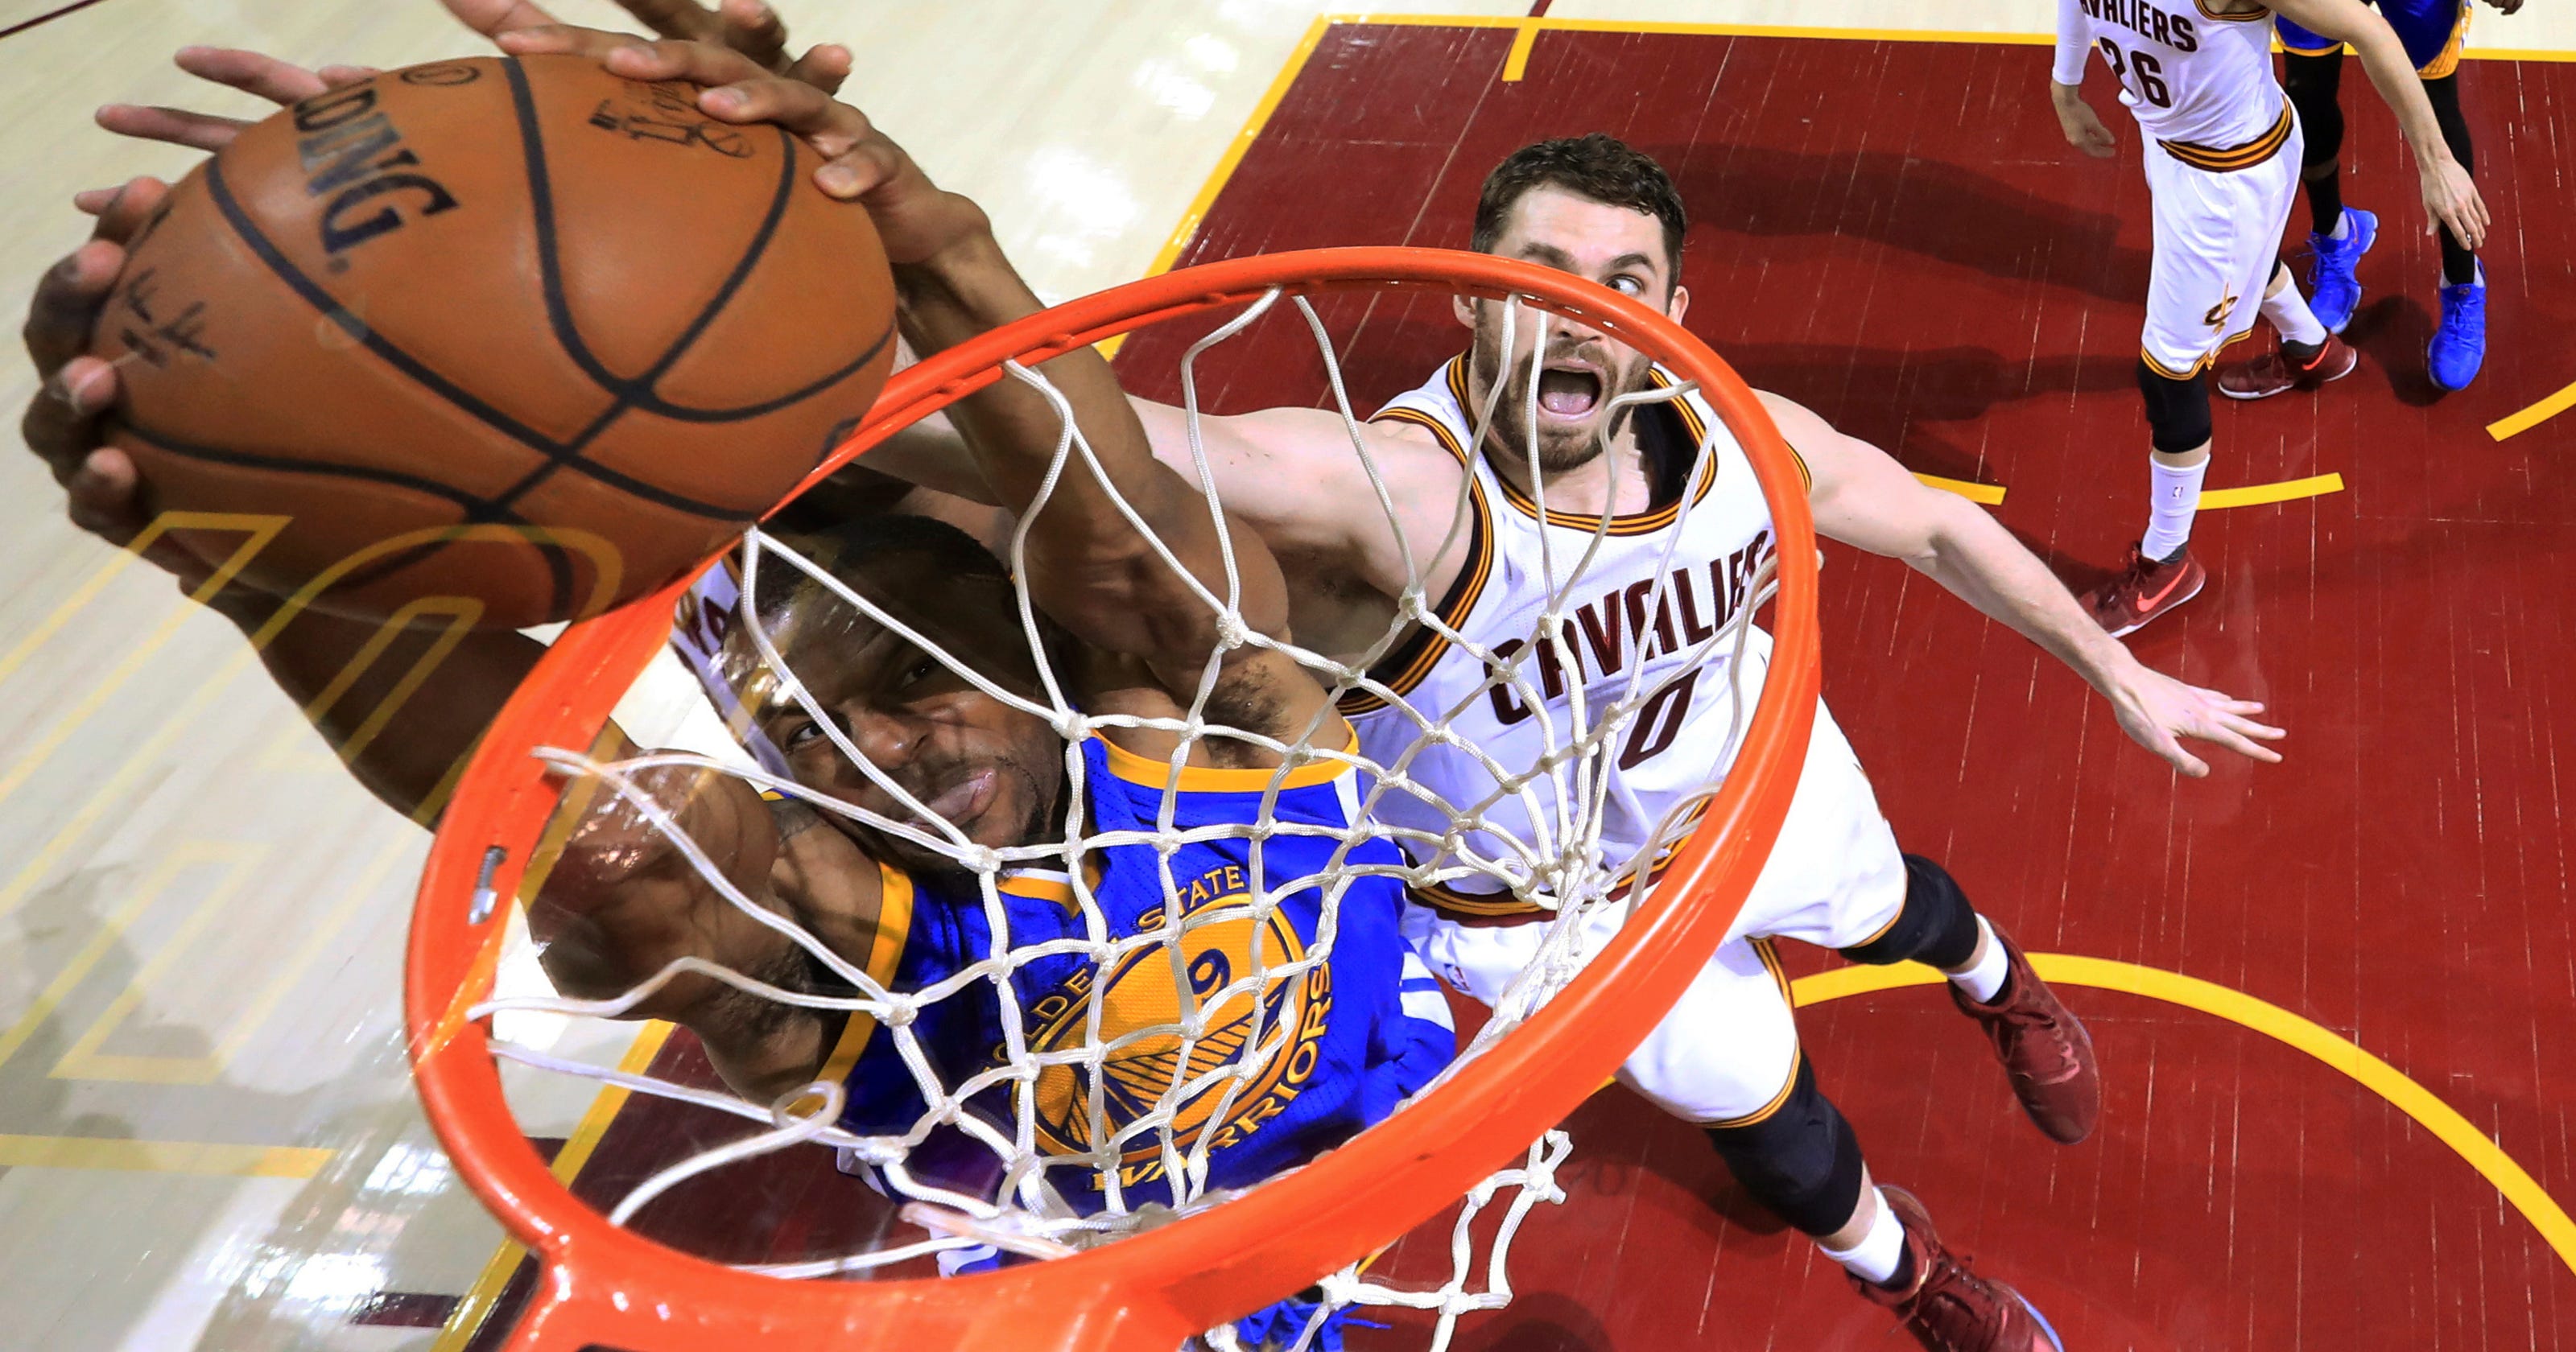 NBA Finals Game 3 ratings up 22 percent from last year